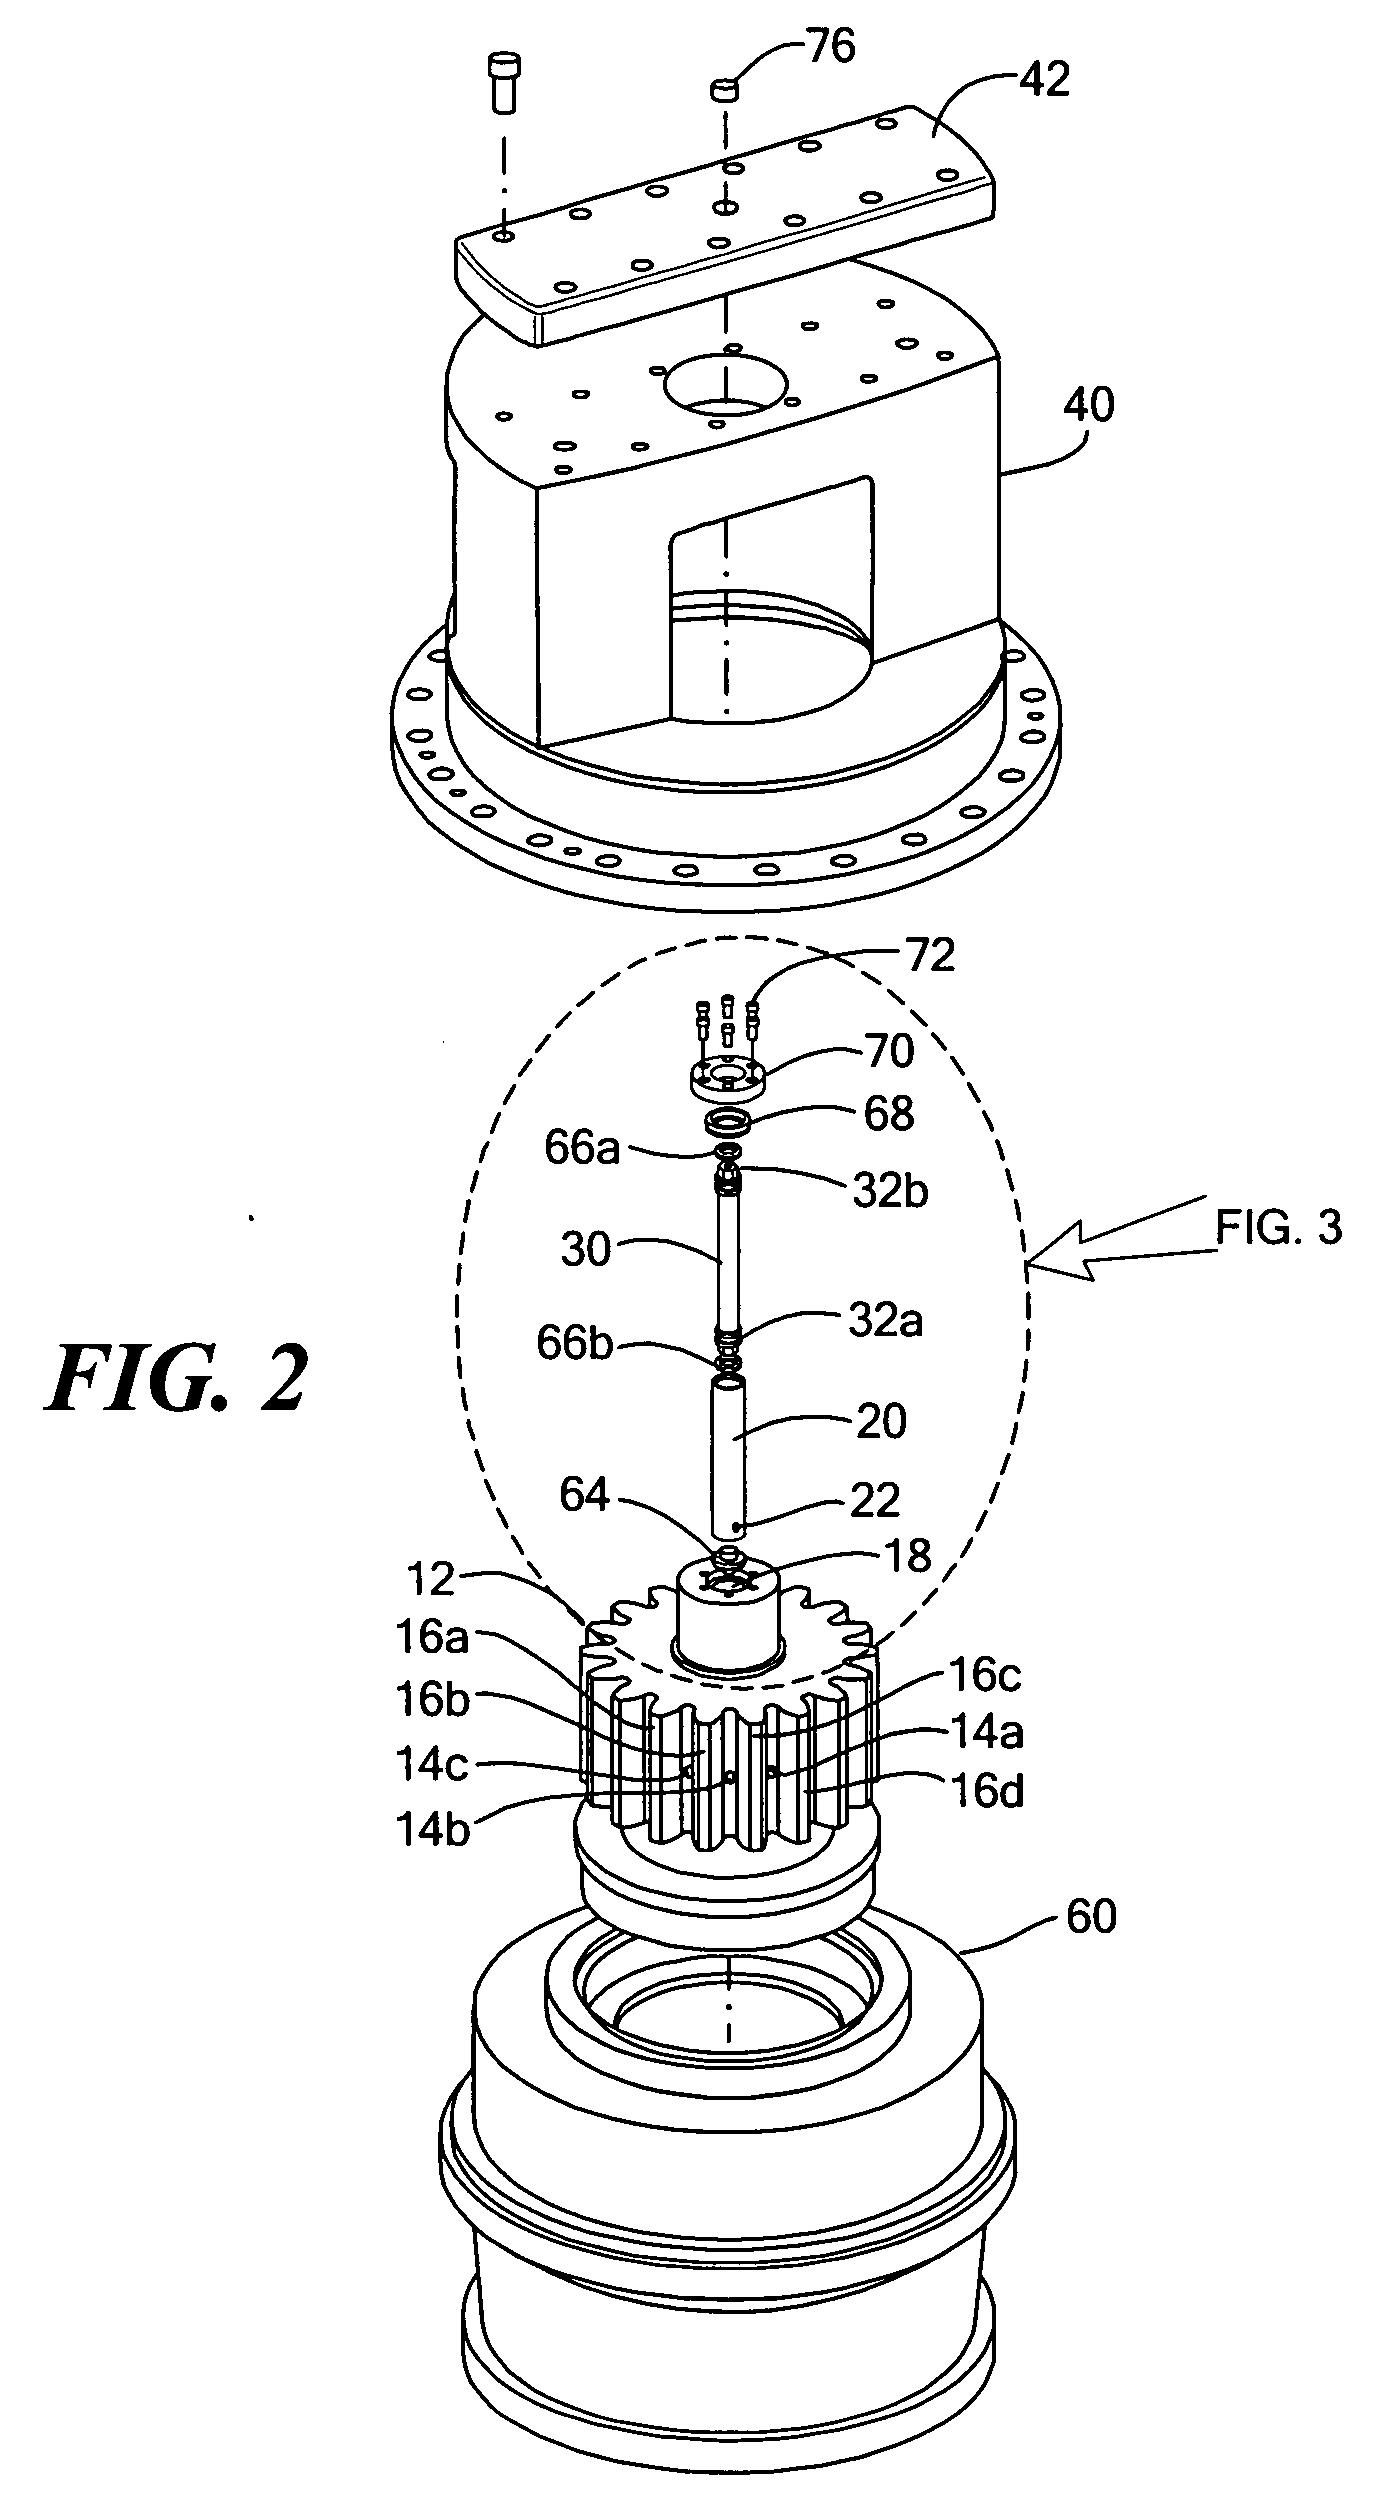 Direct grease injection for large open gearing